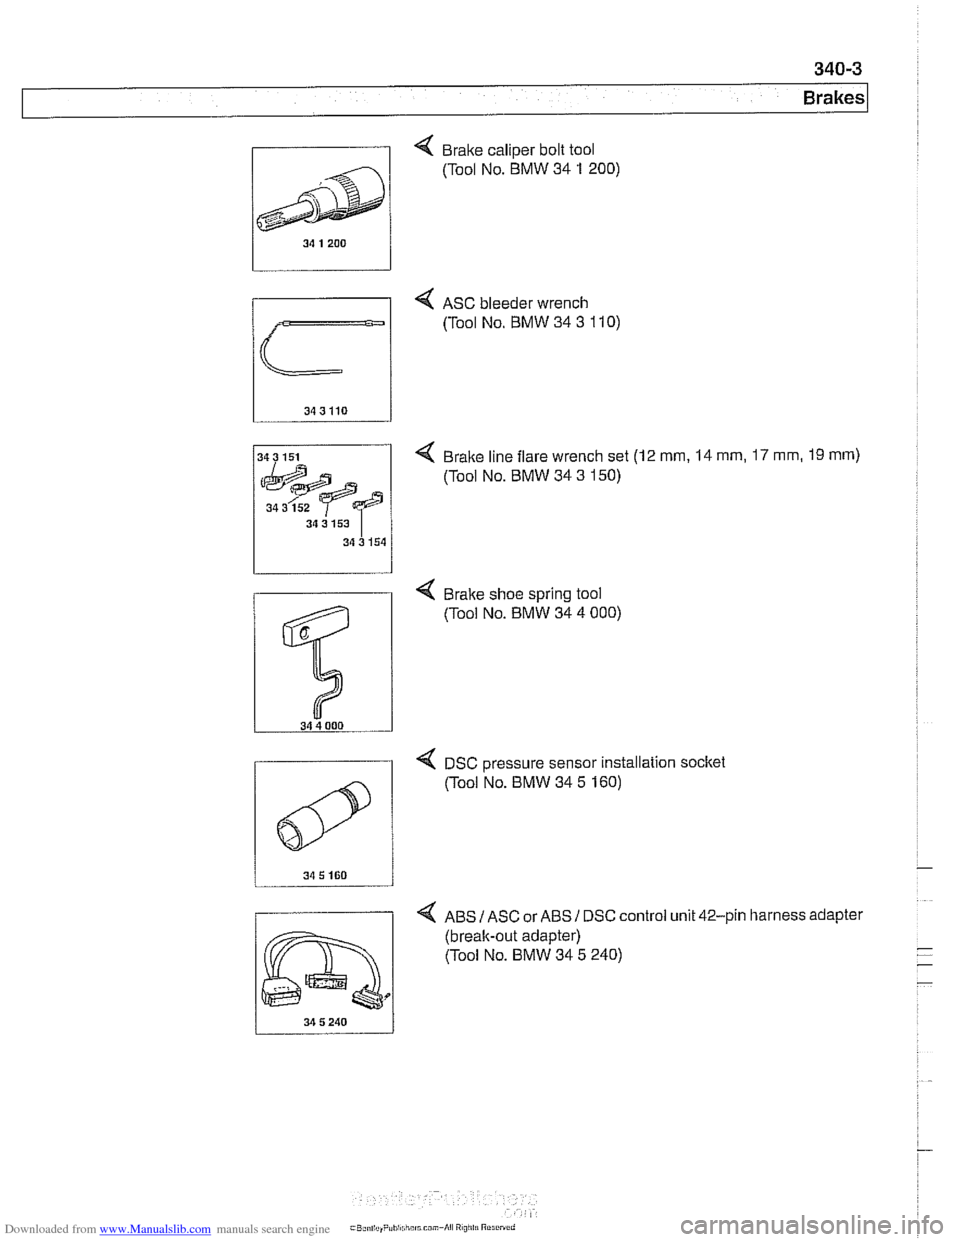 BMW 540i 1997 E39 Owners Manual Downloaded from www.Manualslib.com manuals search engine 
, Brake caliper bolt tool 
4 ASC bleeder wrench 
(Tool No.  BMW 34 
3 110) 
4 Brake line flare wrench  set (12 mm, 14 mm, 17 mm, 19 rnm) 
(Too